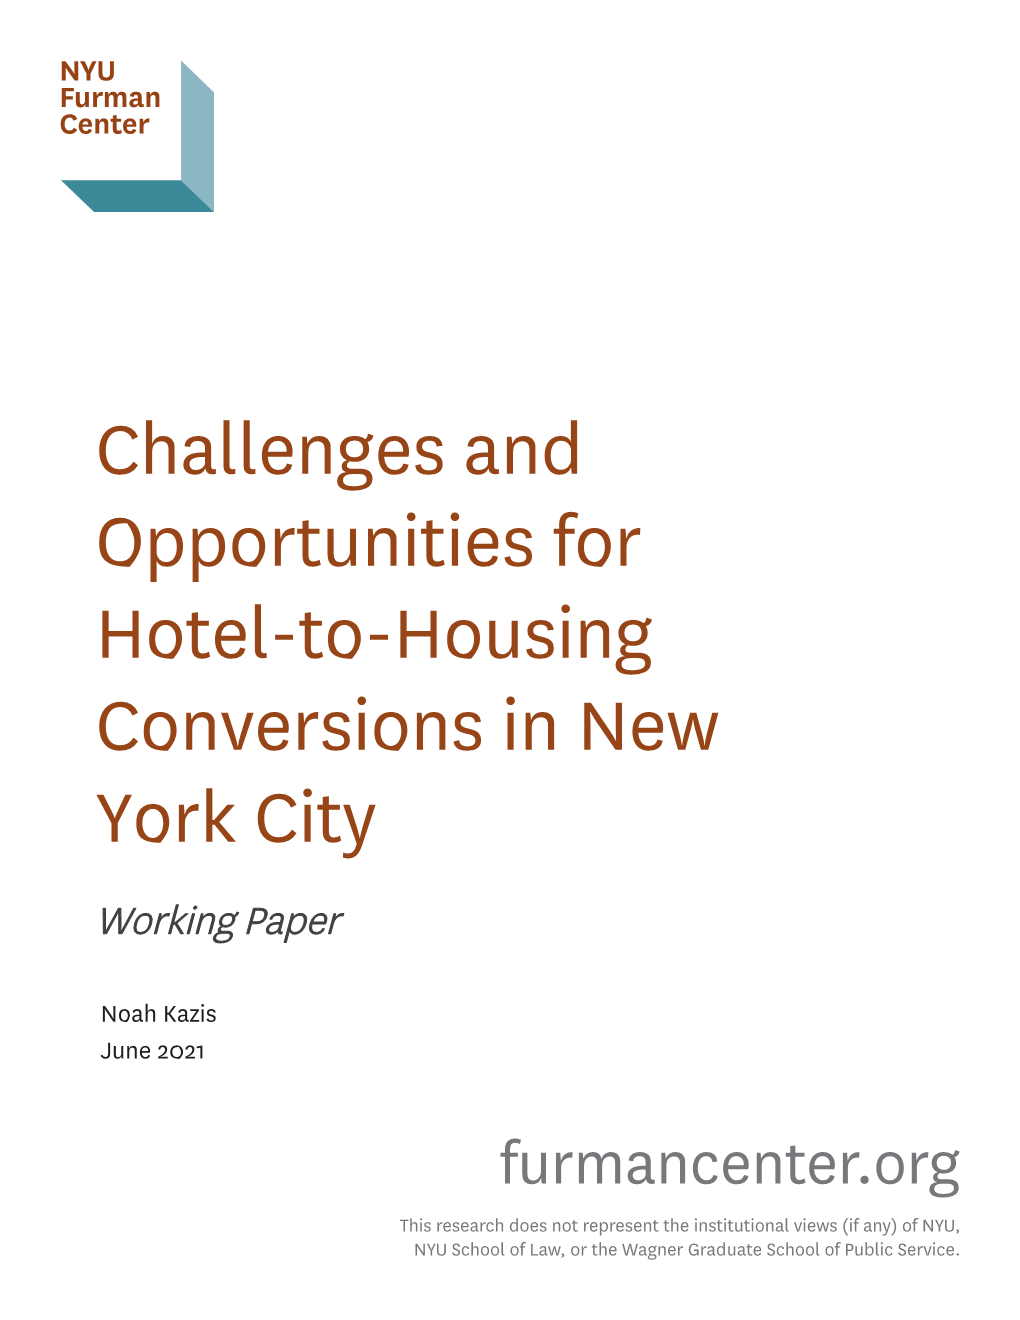 Challenges and Opportunities for Hotel-To-Housing Conversions in New York City Working Paper